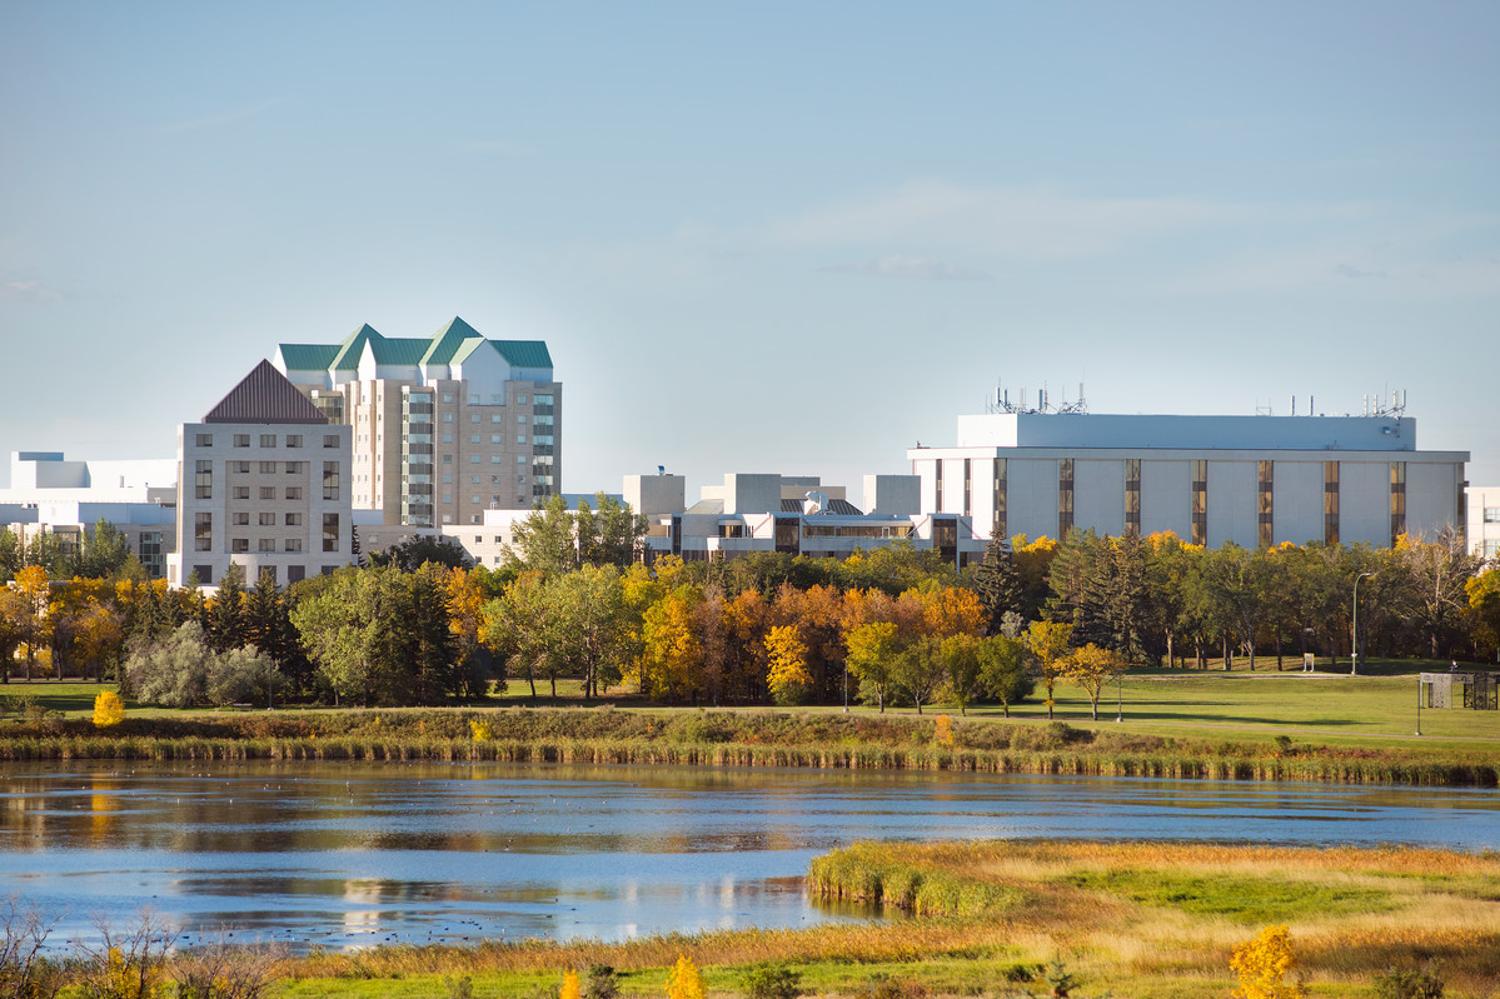 View of campus from across Wascana Lake